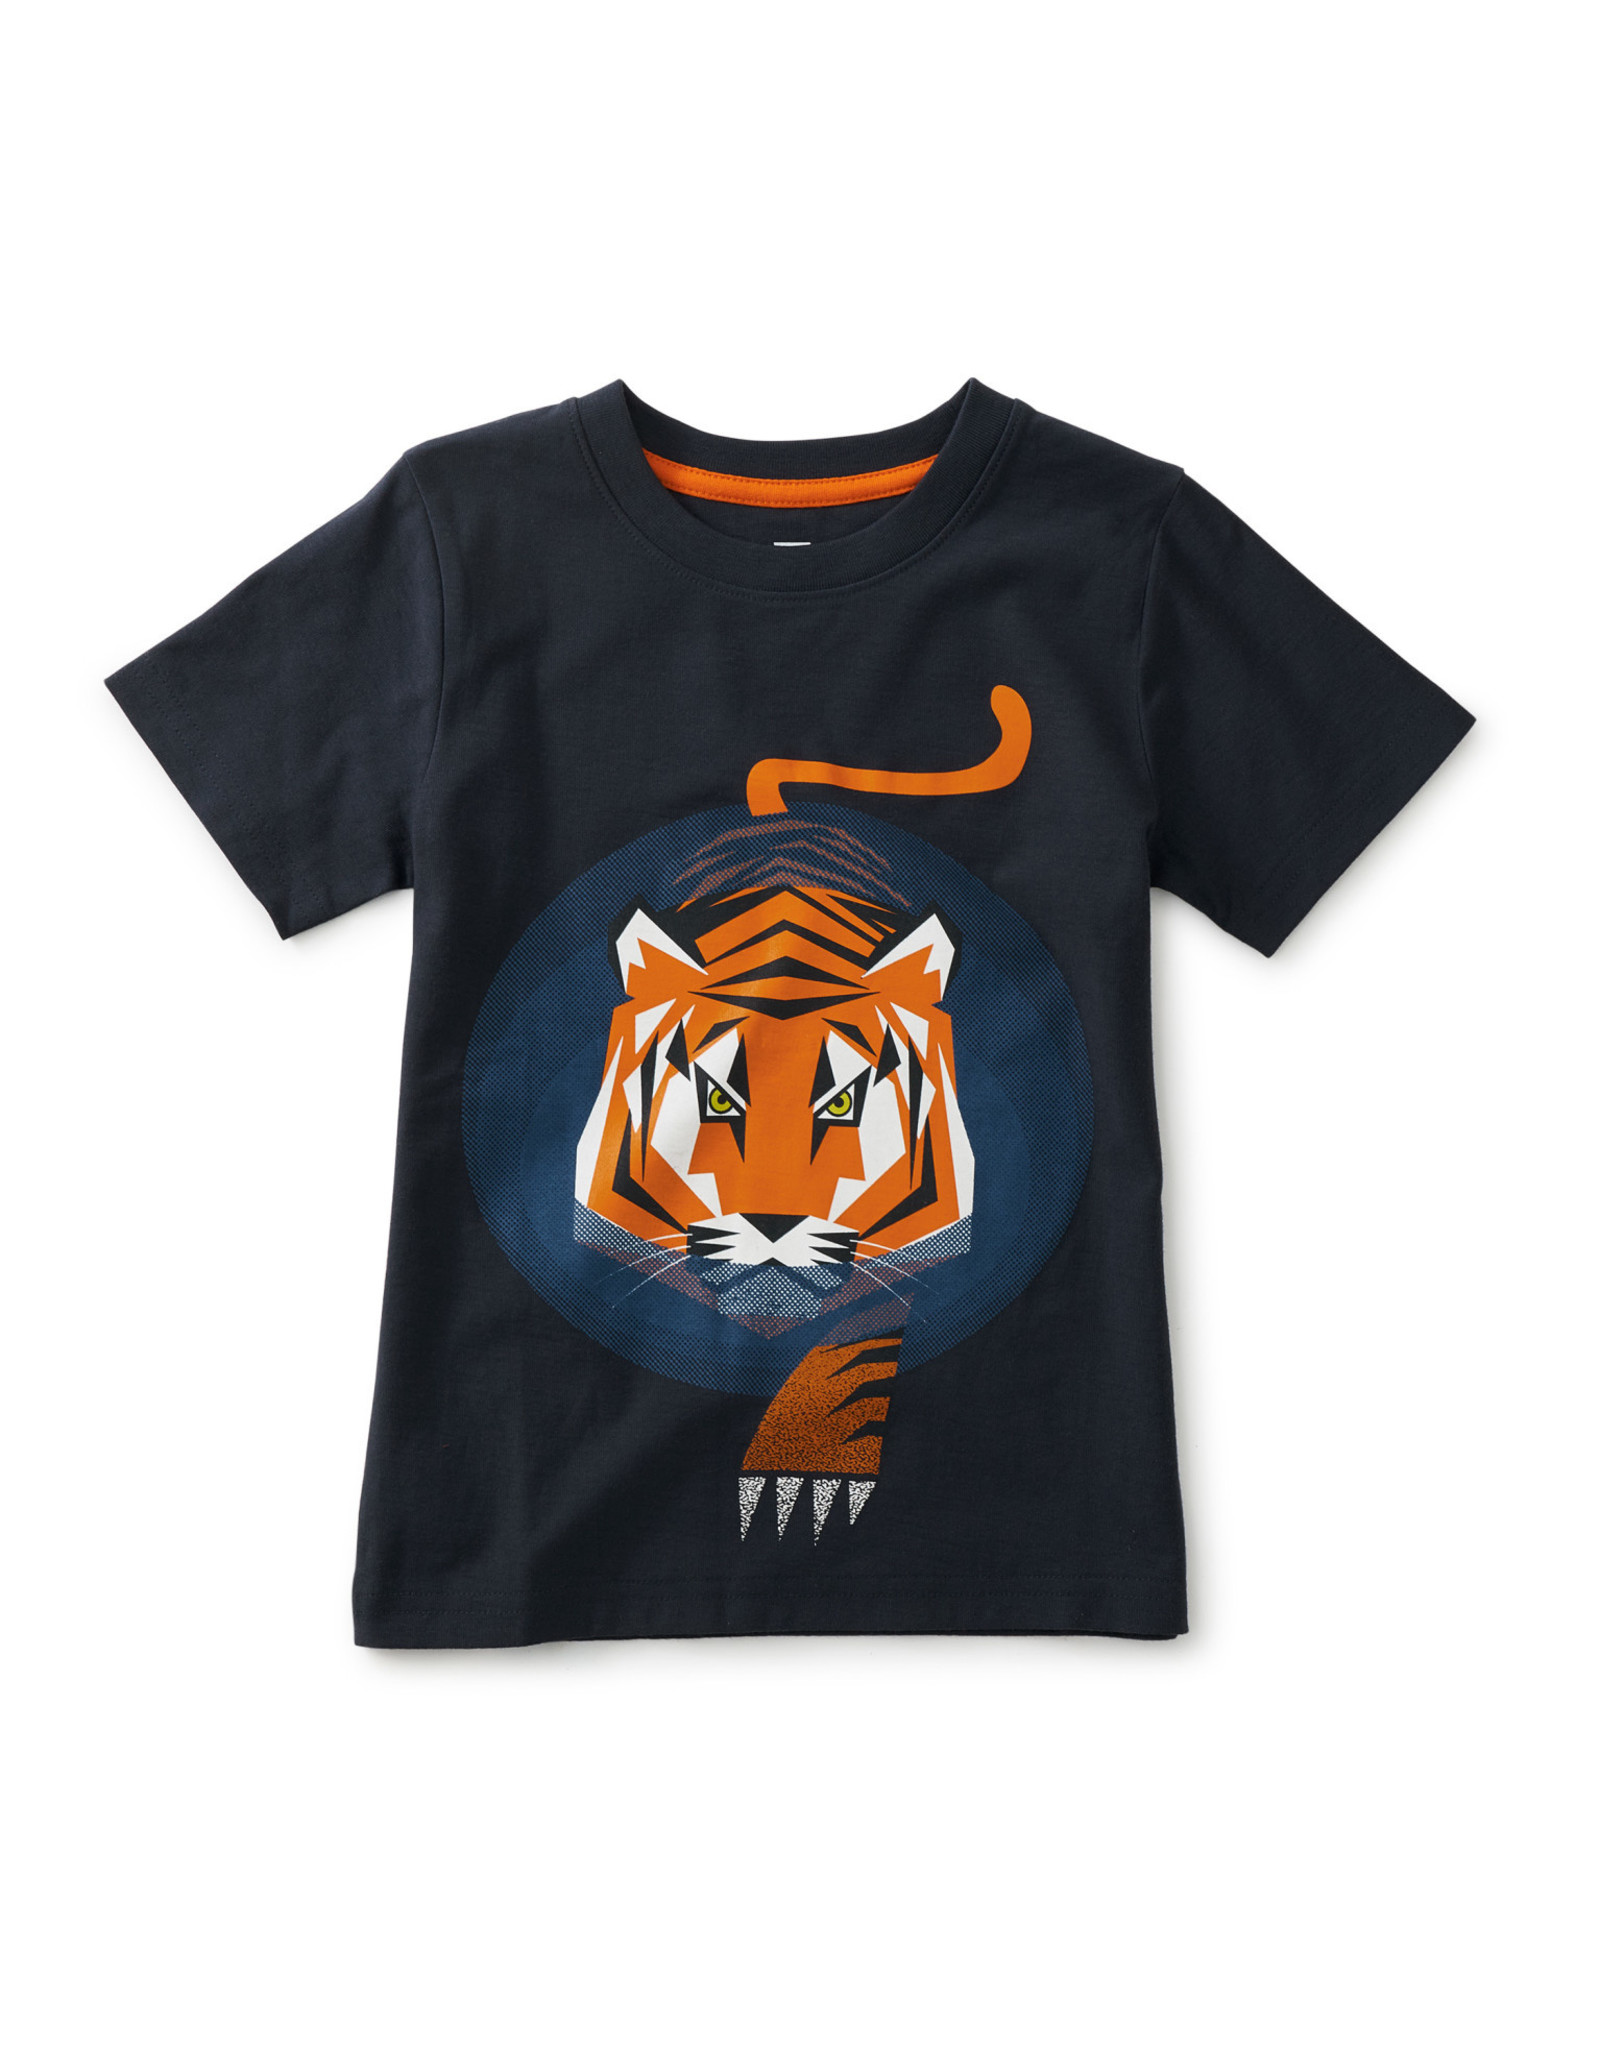 Tea Prowling Tiger Graphic Tee